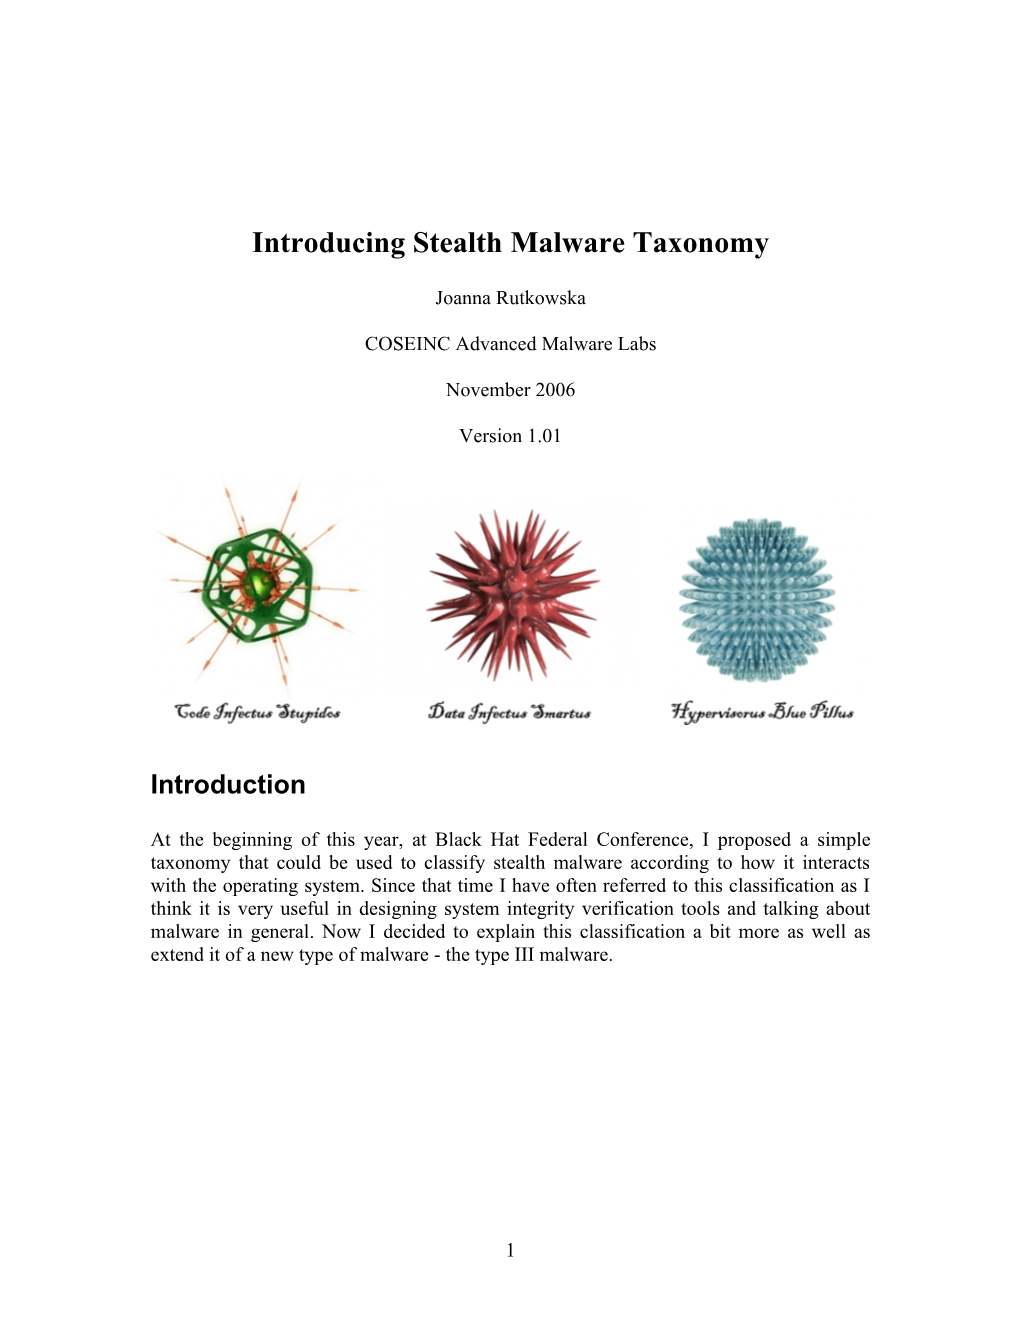 Introducing Stealth Malware Taxonomy